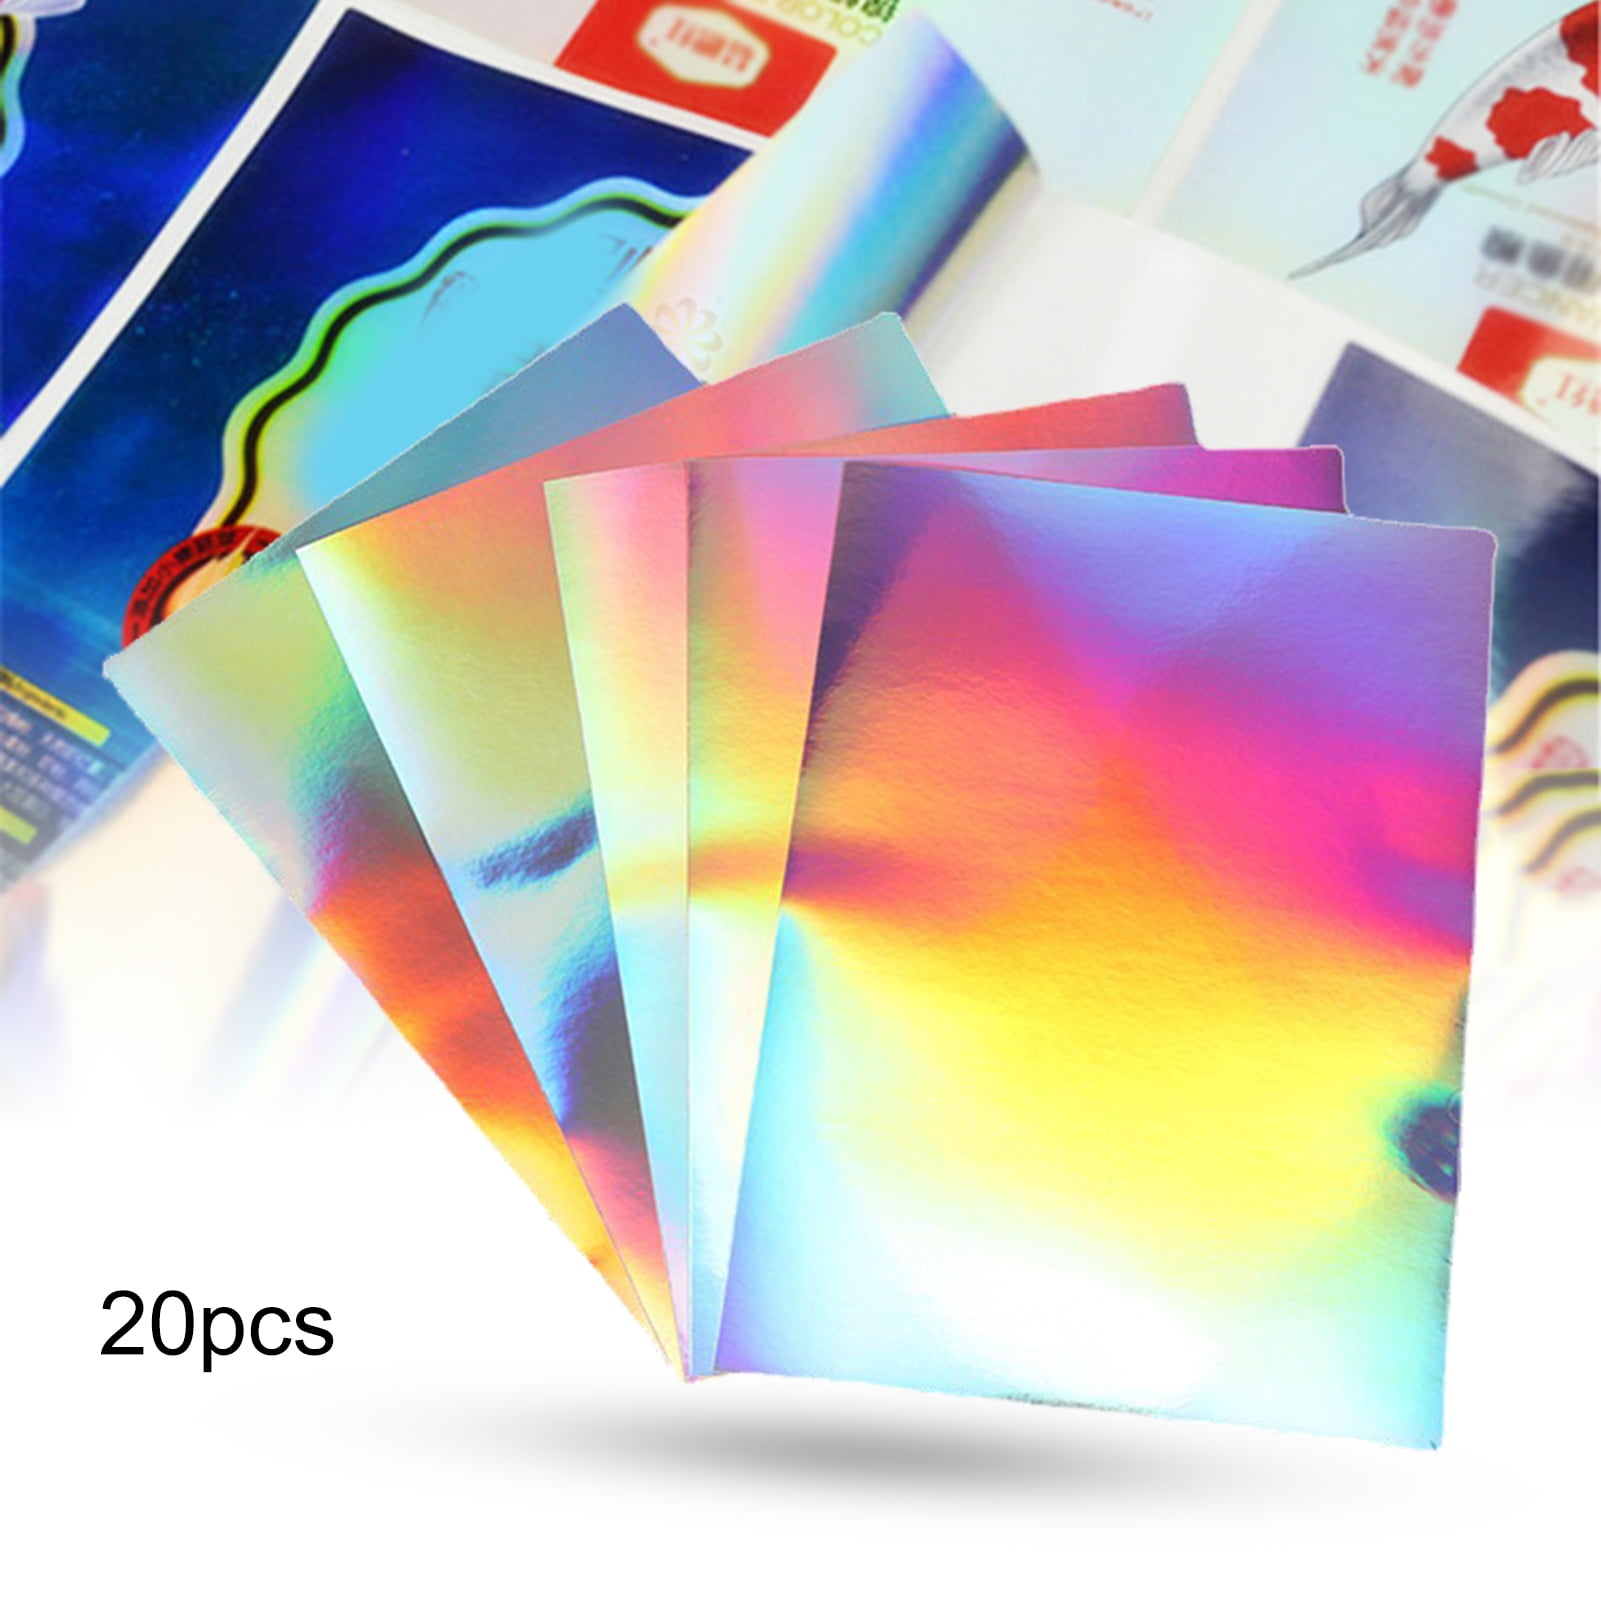 20 x A4 Sheets Of Self Adhesive Craft Vinyl 20% Off 